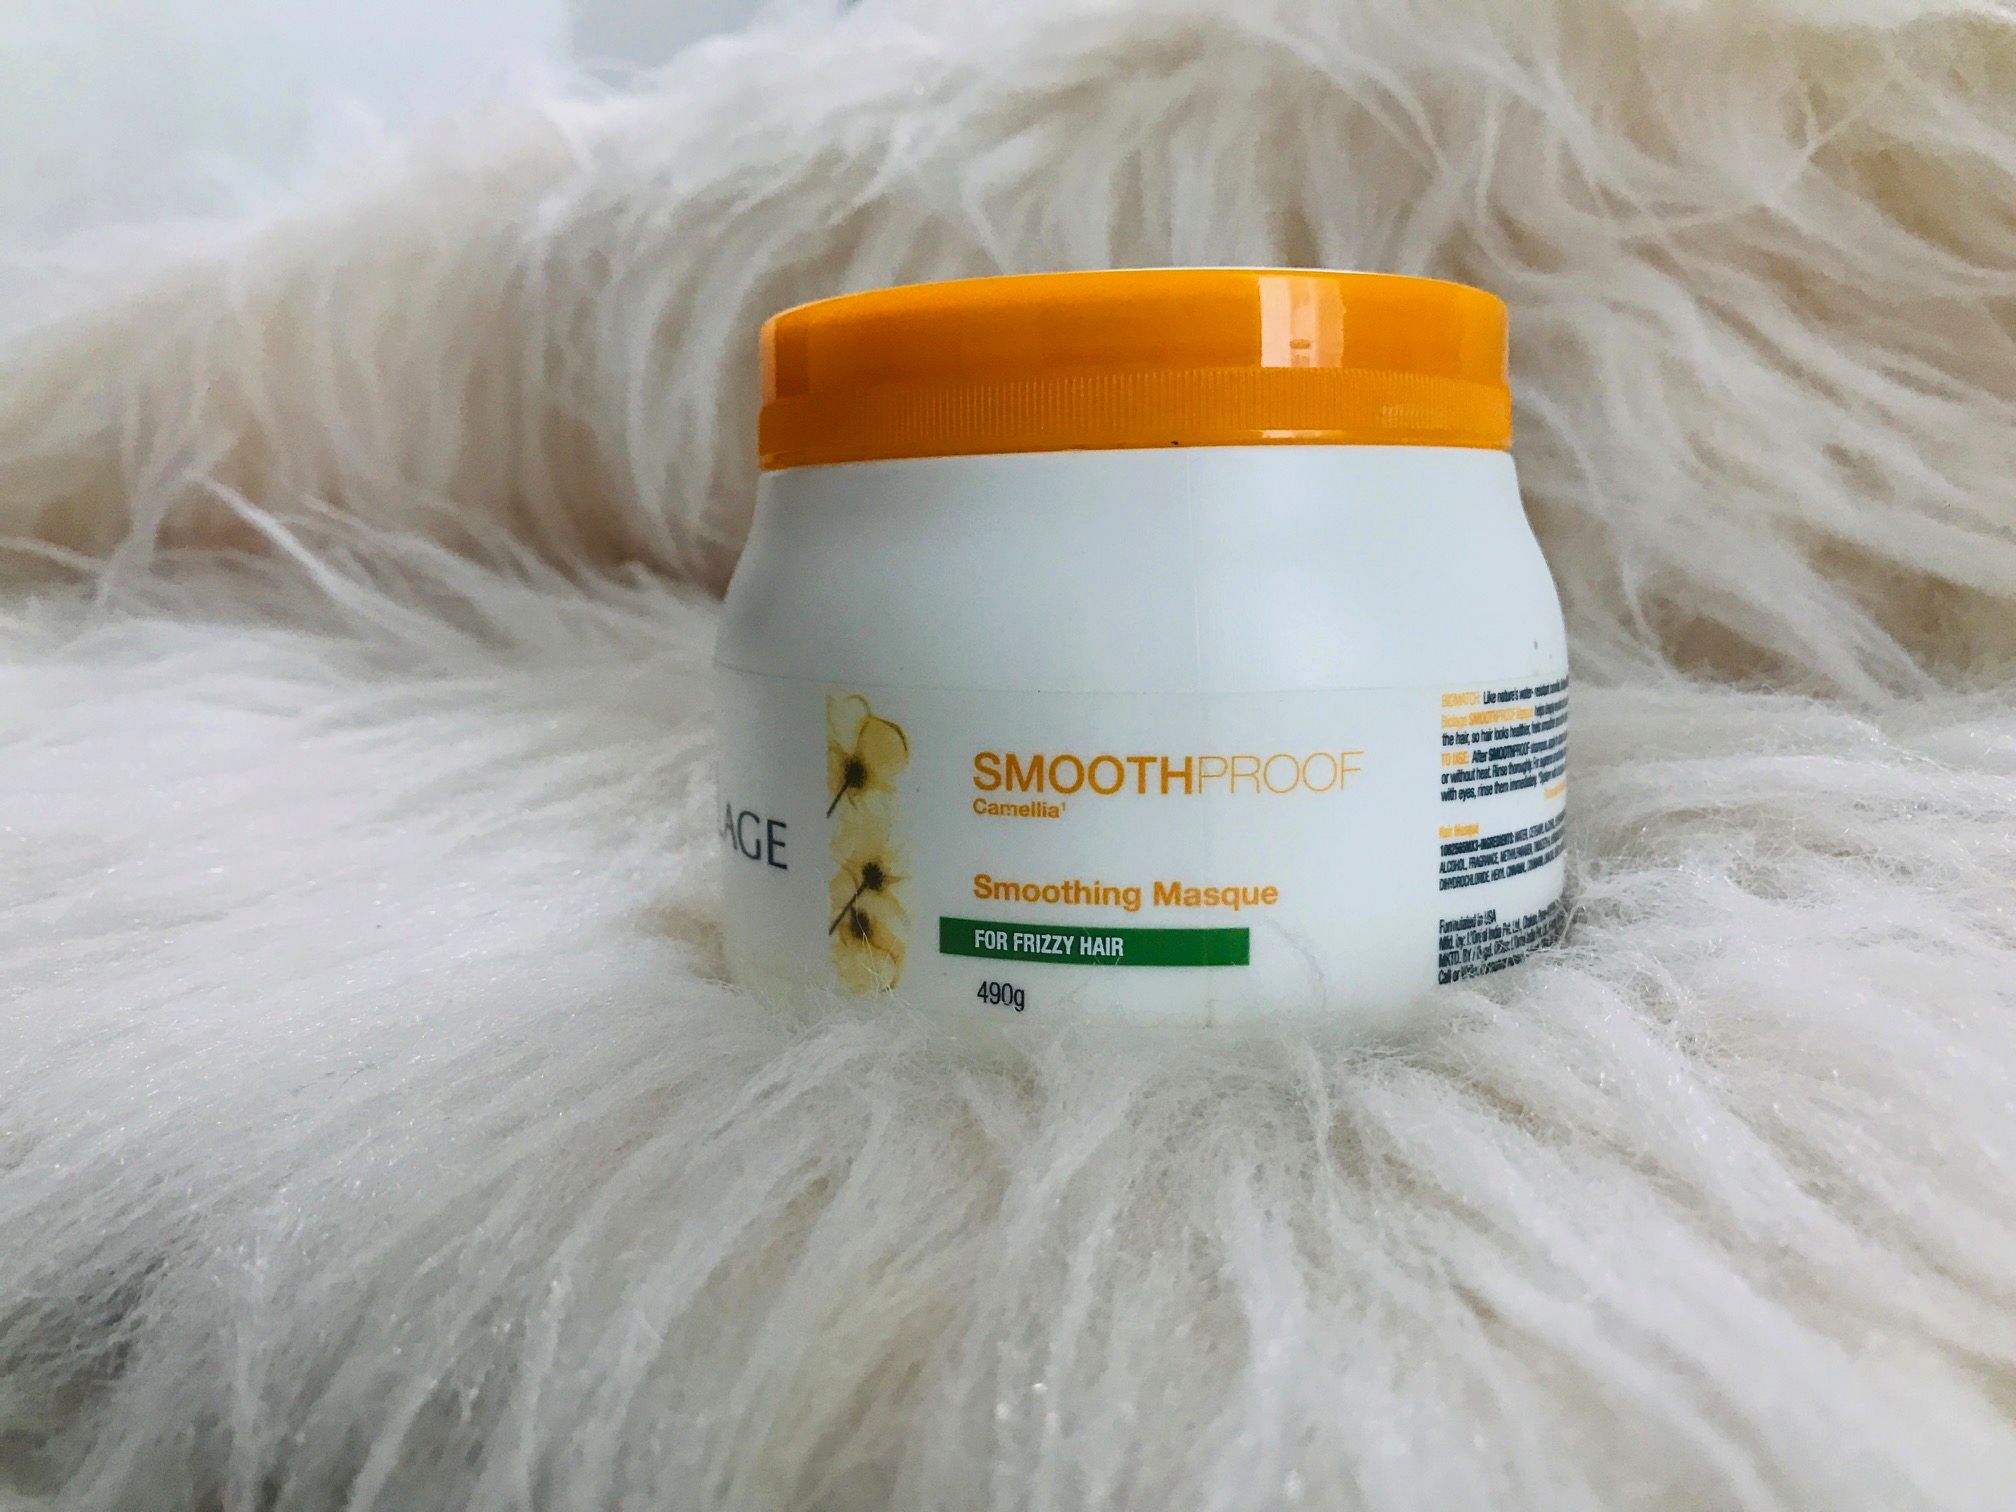 Matrix biolage proof smoothing mask review - Candy Crow